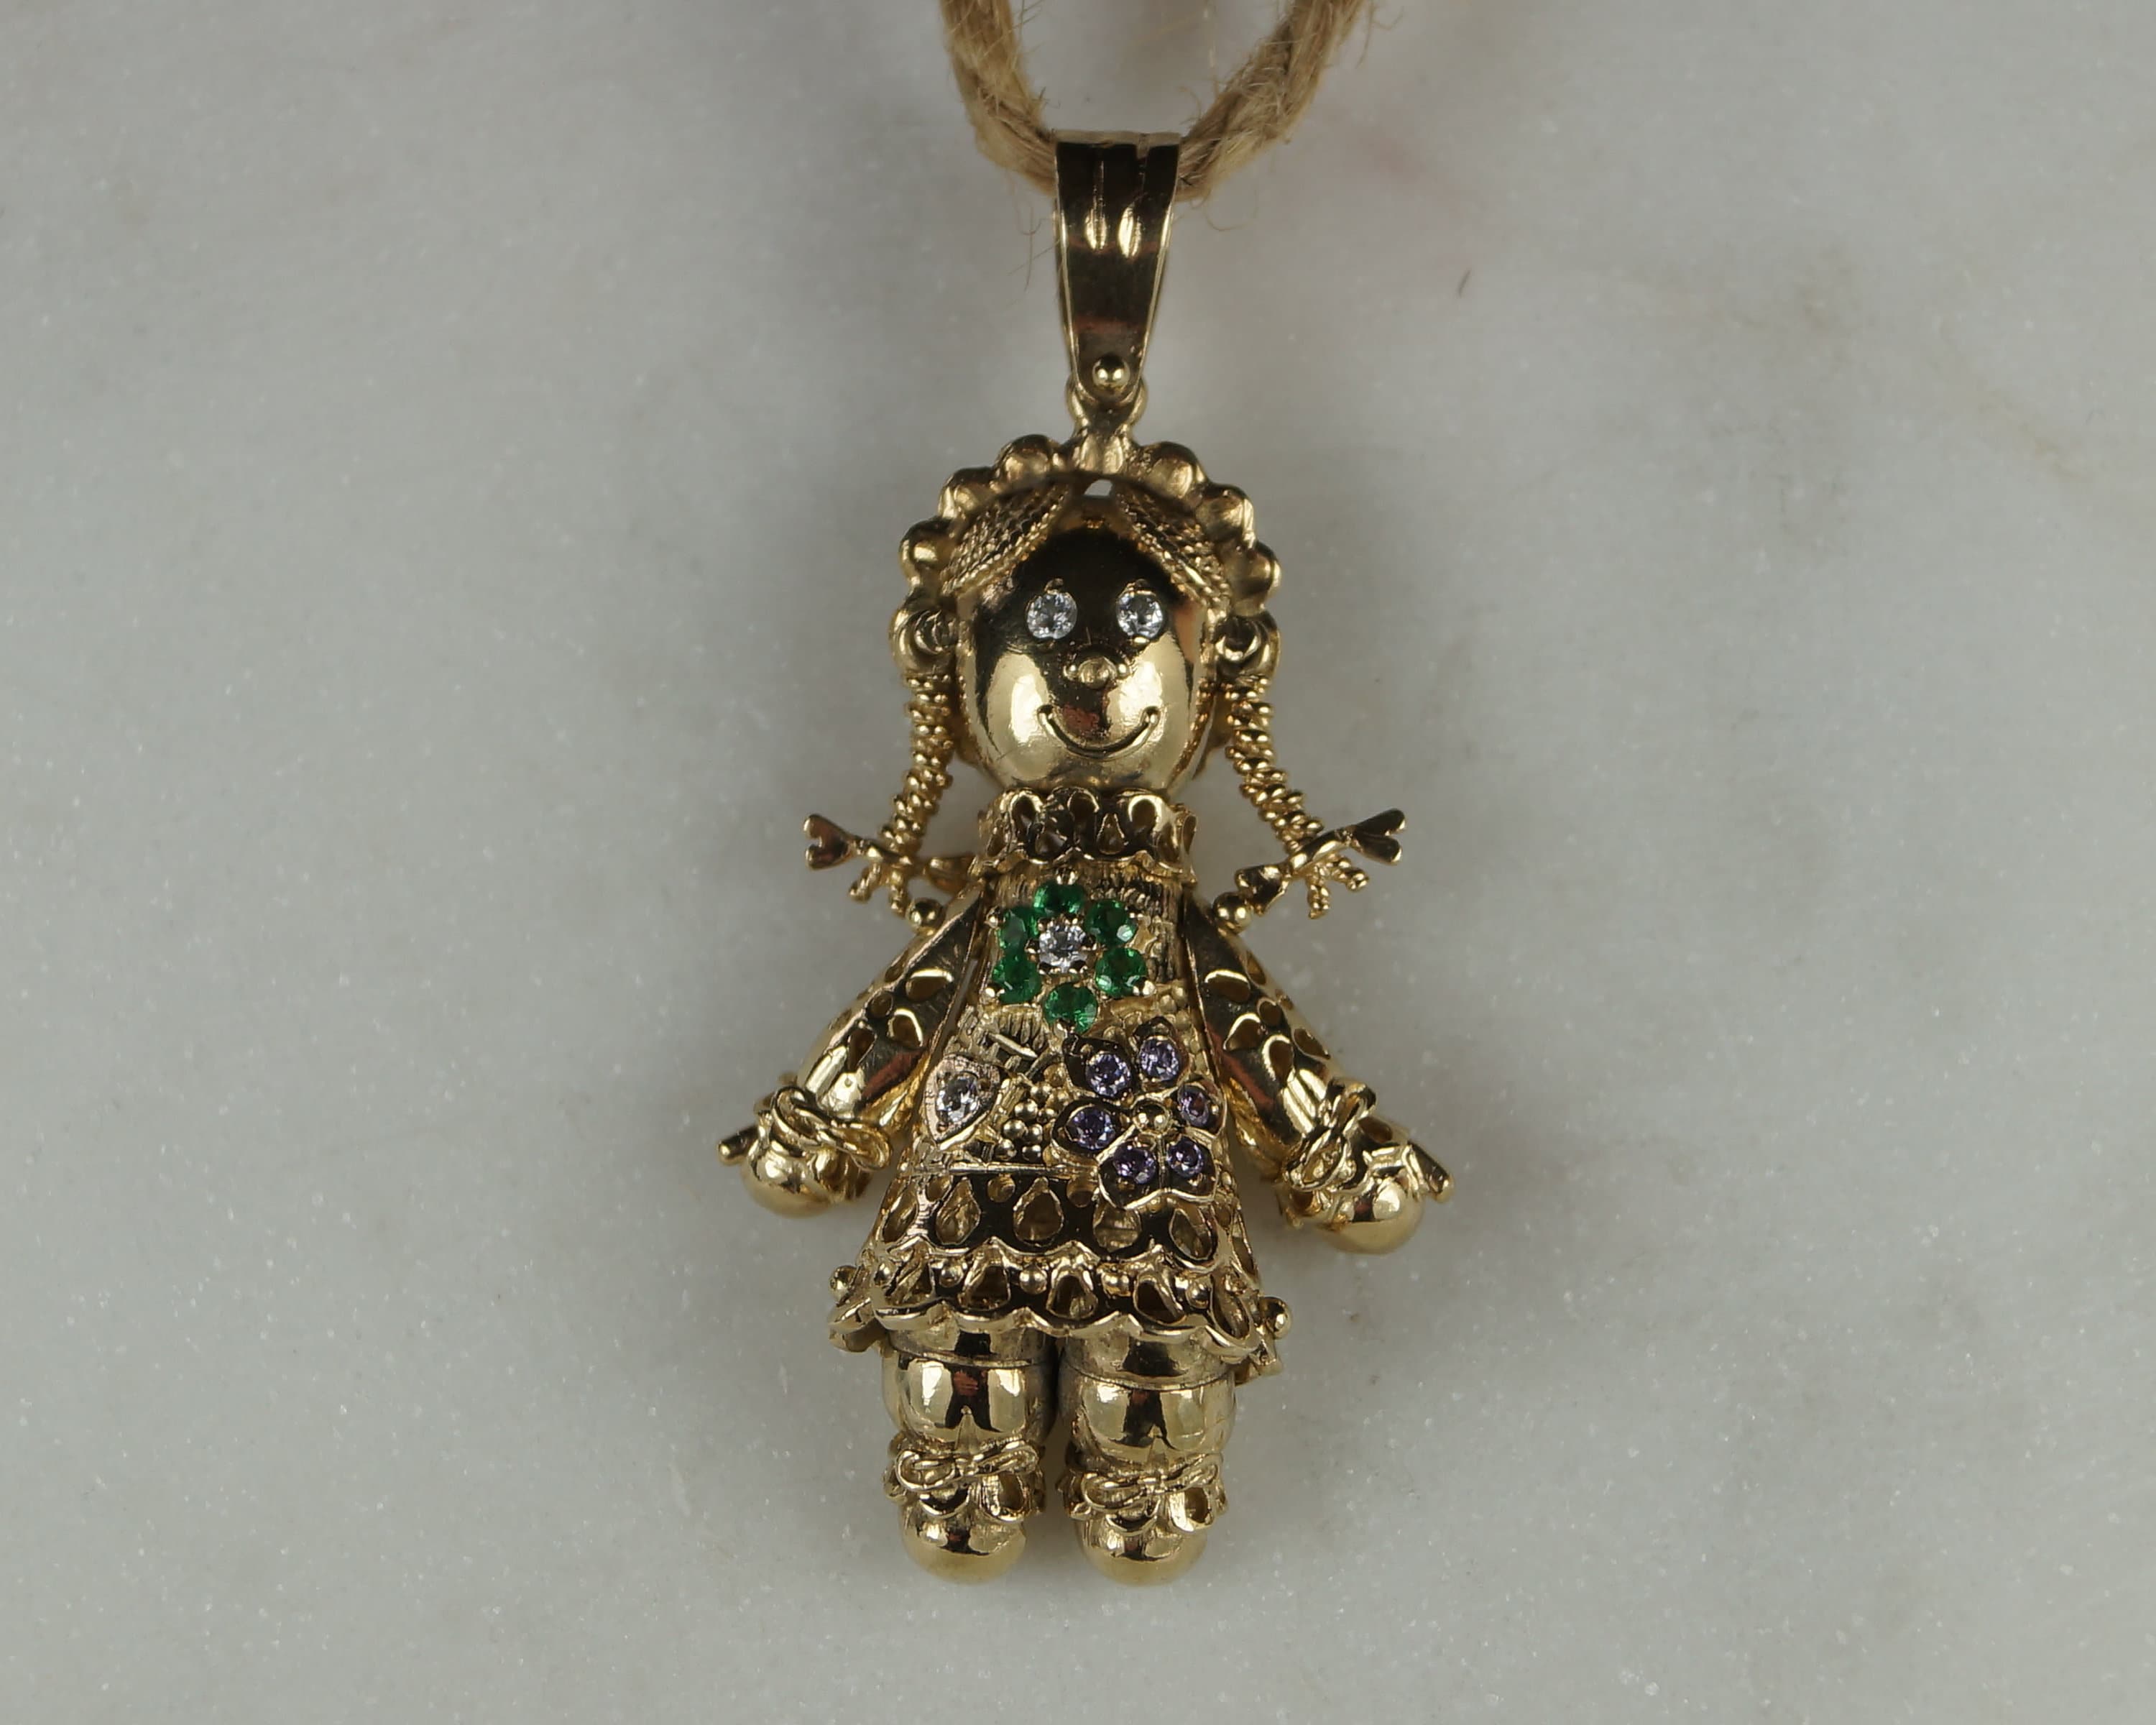 Buy THE BLING KING Gold 3D Rag Doll Pendant/Gold 3D Clown Pendant with  Cuban Chain Necklace - Gold Plated Jewellery with Moveable Arms, Legs, &  Head - Chain Size: 4mm x 24